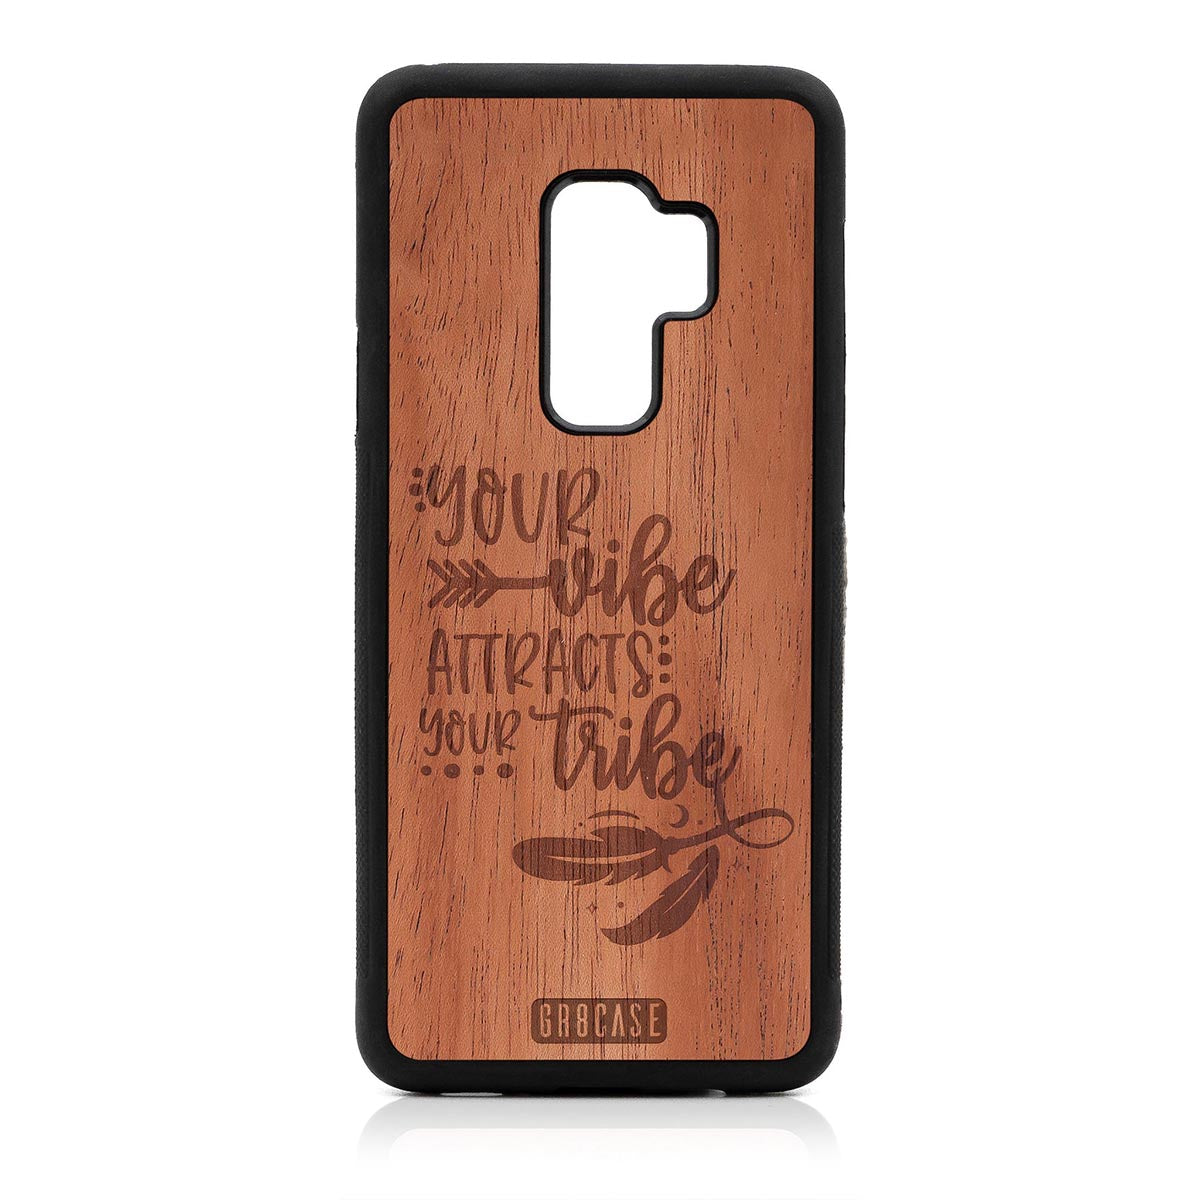 Your Vibe Attracts Your Tribe Design Wood Case Samsung Galaxy S9 Plus